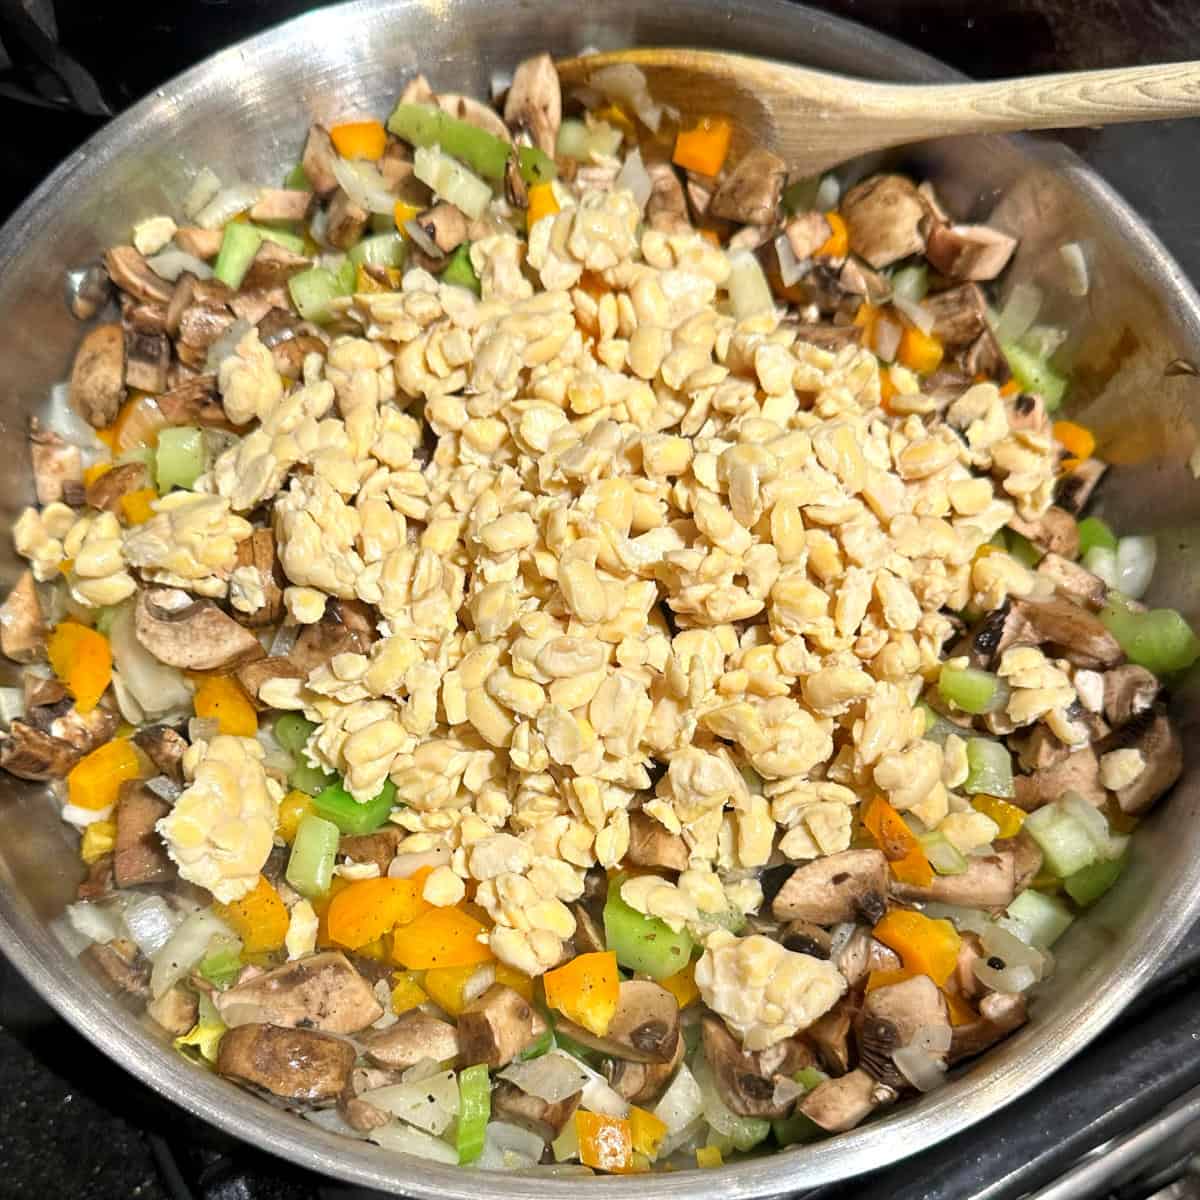 Crumbled tempeh added to veggies in skillet.